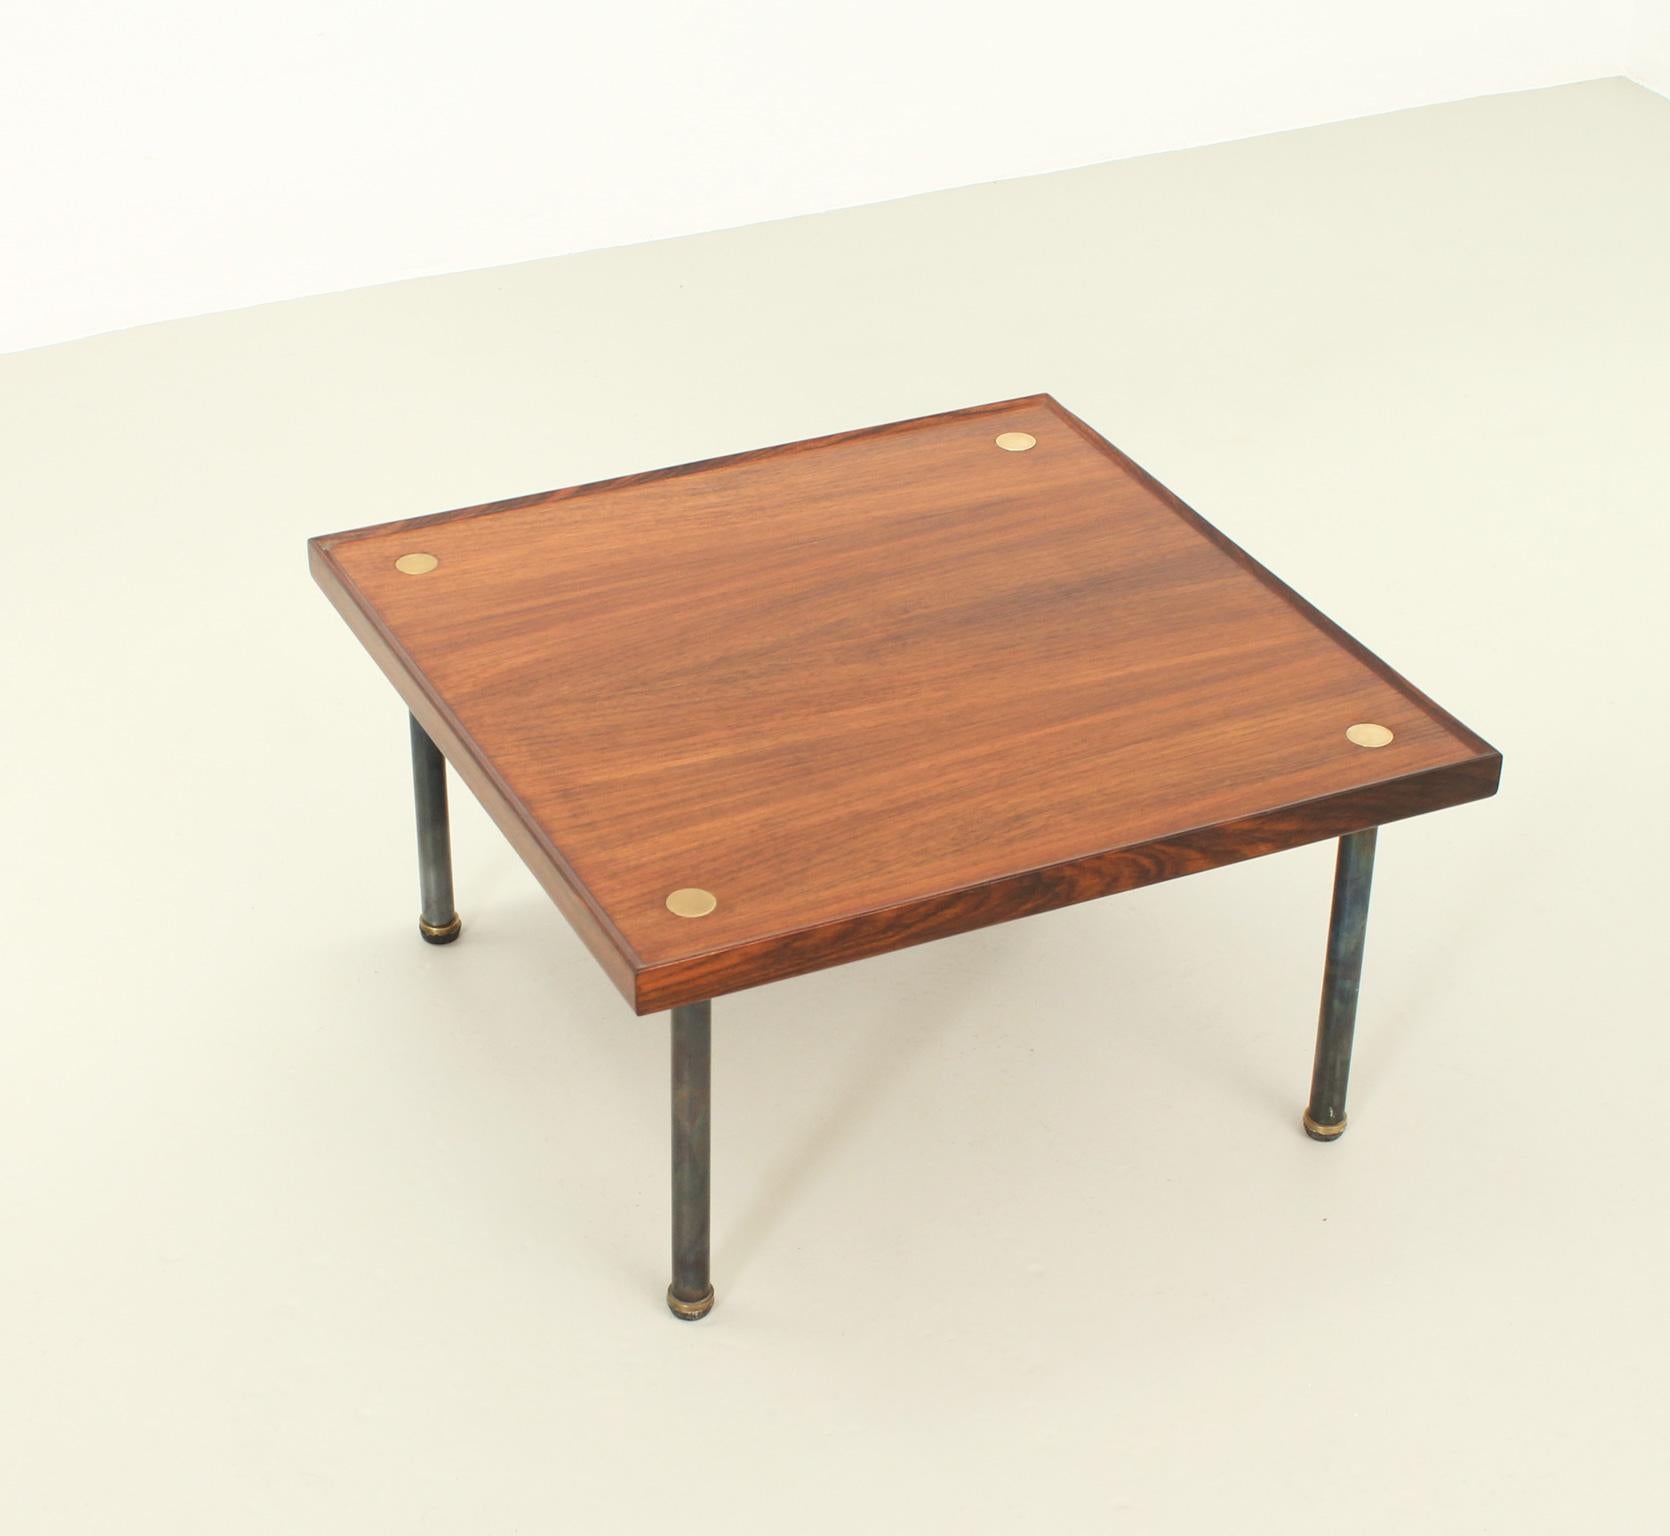 Side table model Konvival designed in 1957 by Fabrizio Bruno for Klan, Italy. Hardwood top, metal legs and brass fittings.